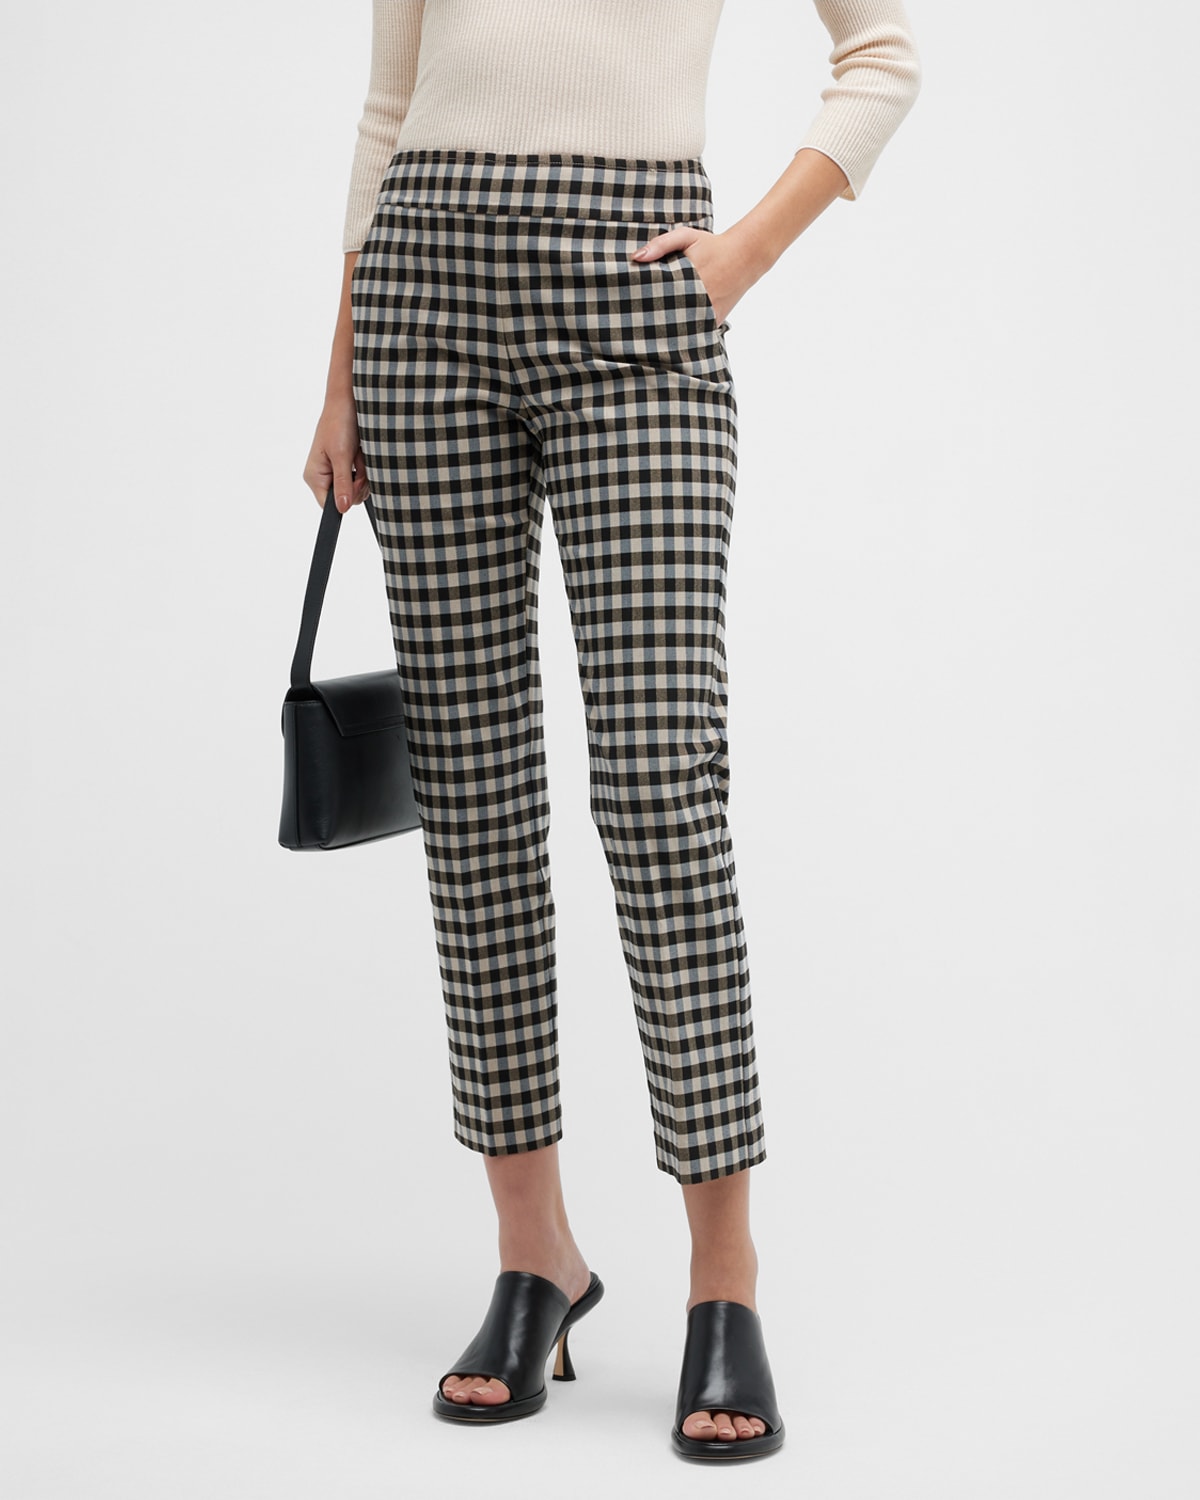 Avenue Montaigne Lulu Cropped Gingham-Print Pants